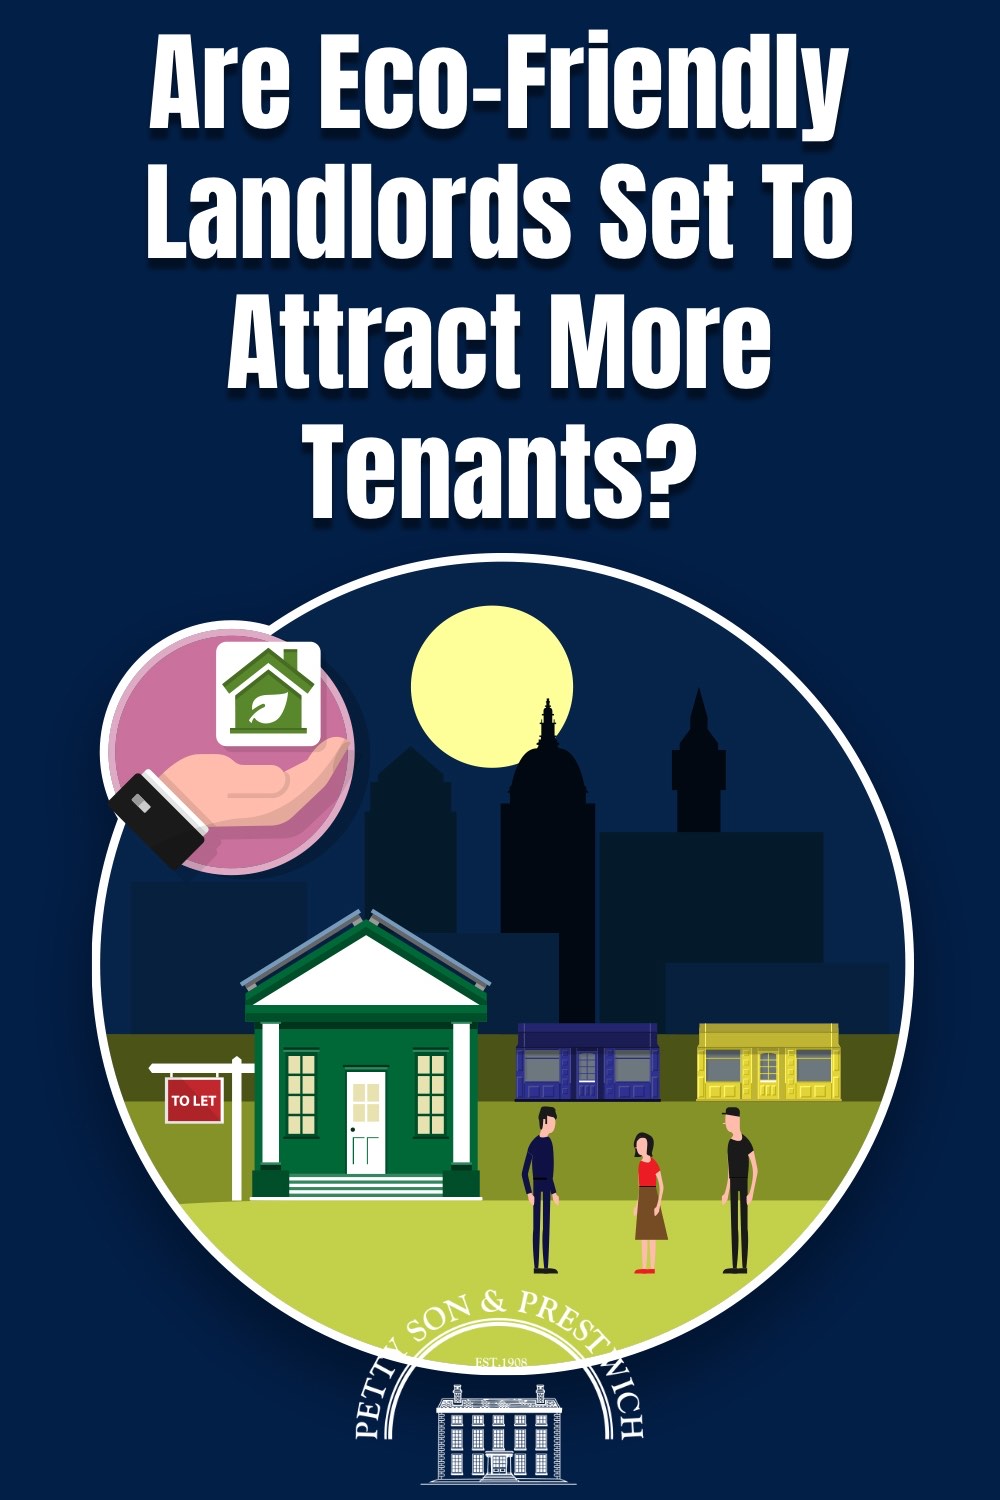 can eco friendly landlords attract more tenants